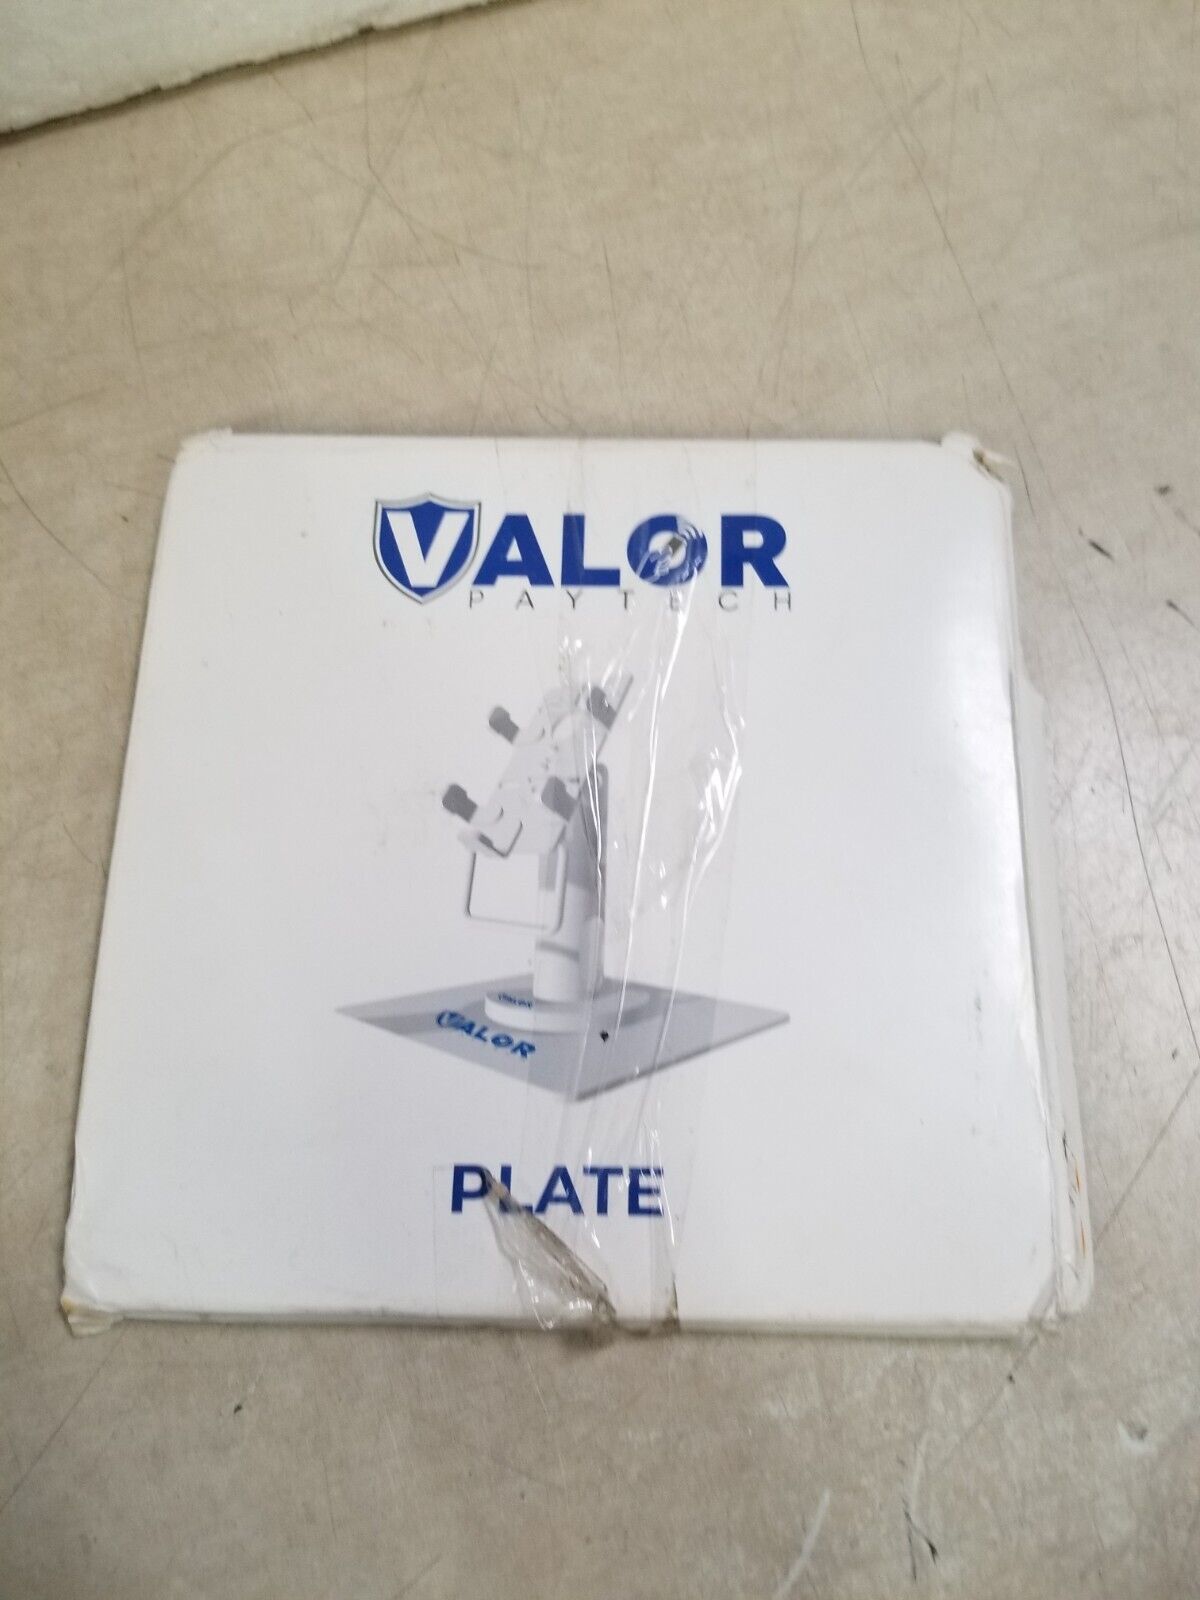 Valor Paytech VL100 Square Plate for Stand